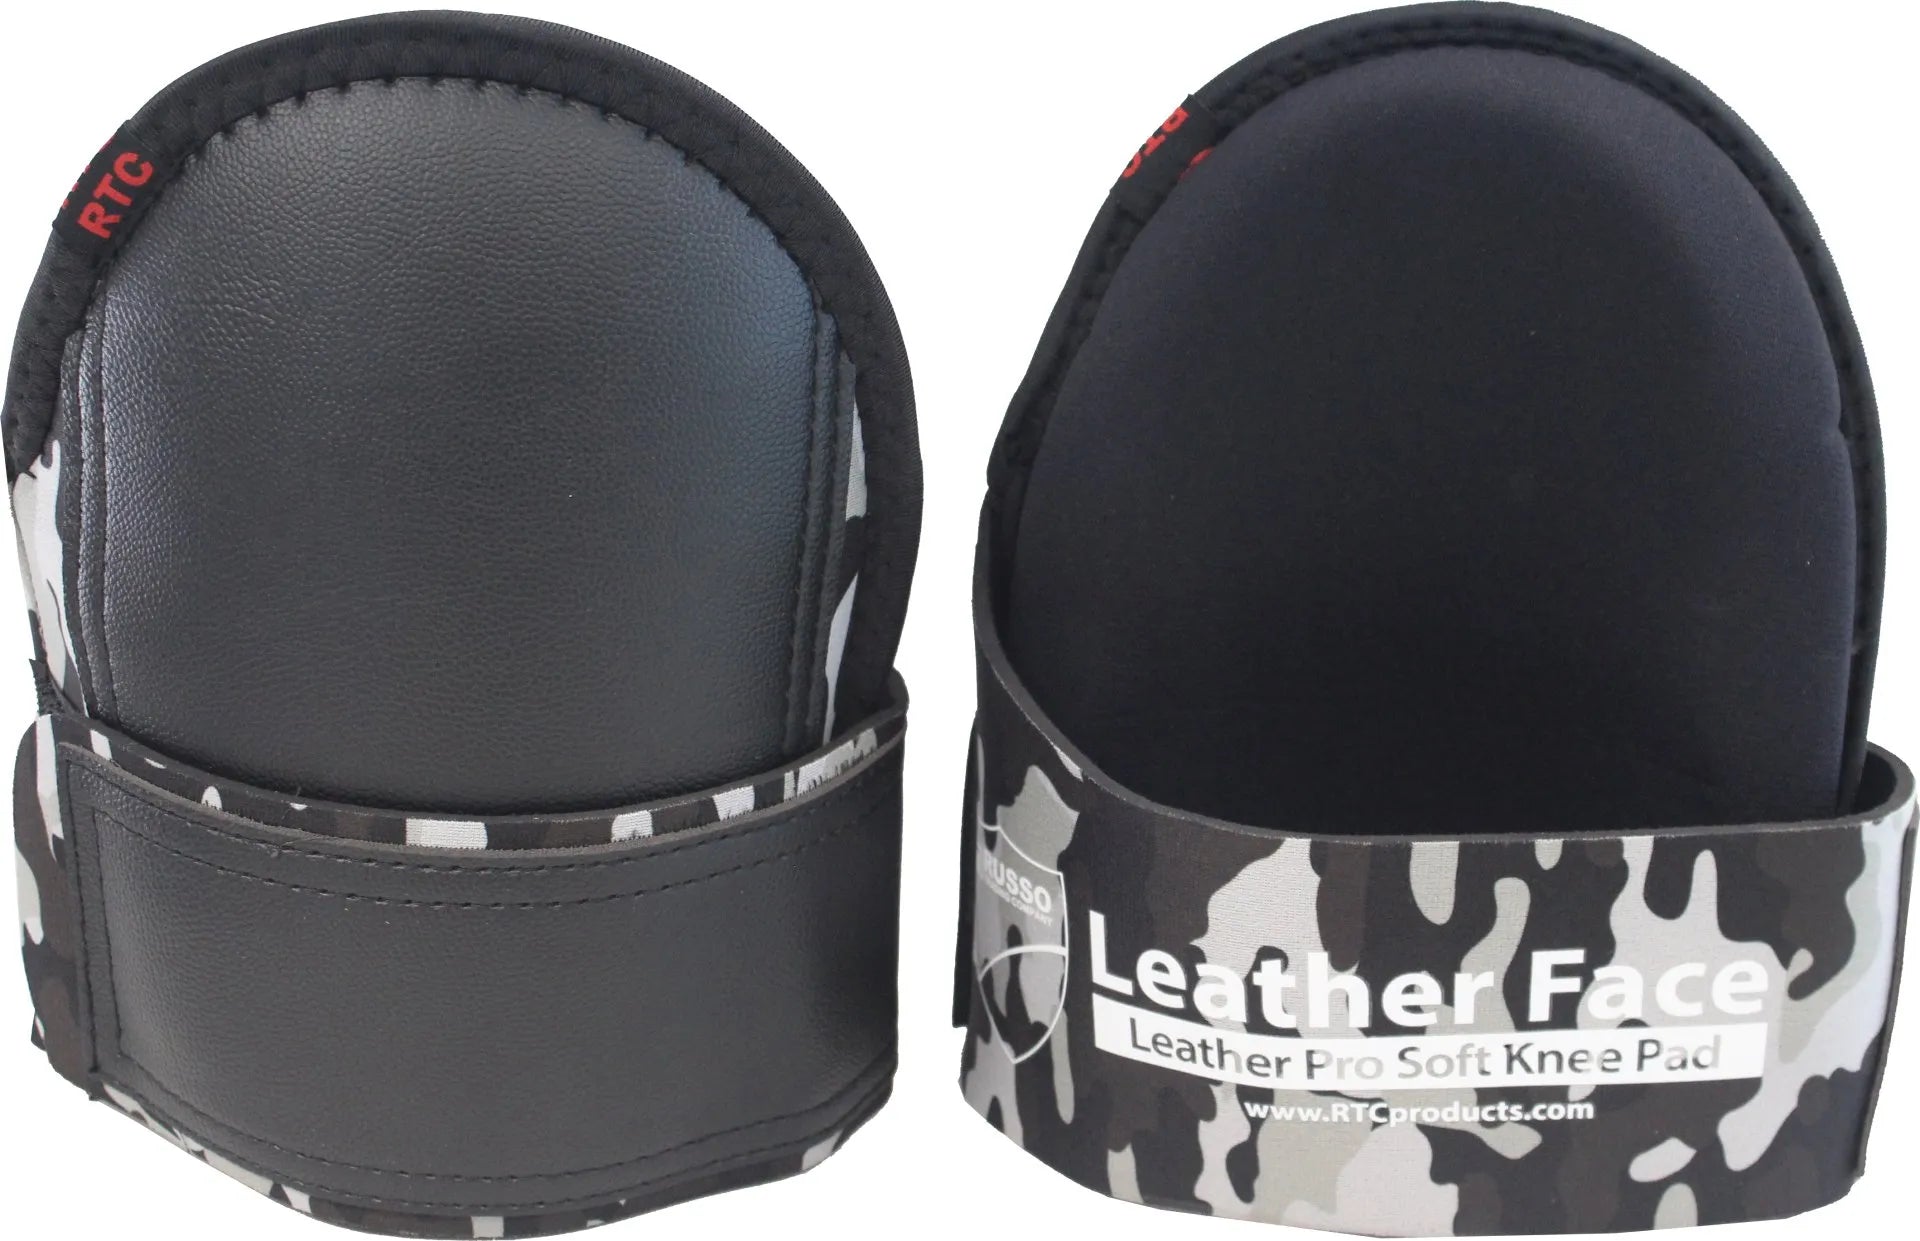 RTC Products KPLF RTC Leather Face Super Soft Knee Pads